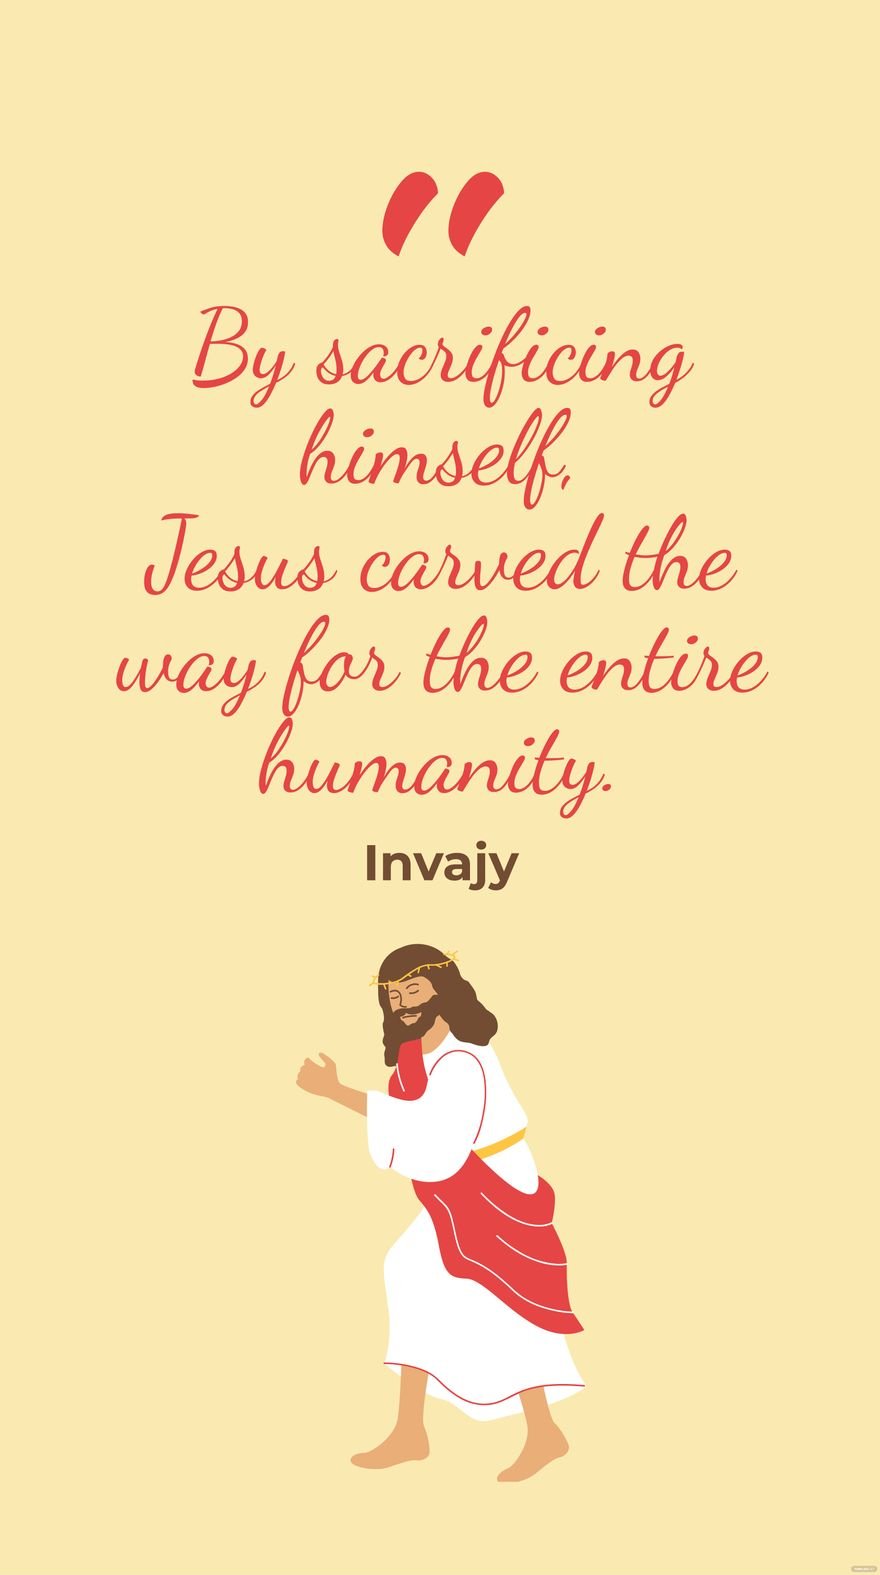 Free Invajy - By sacrificing himself, Jesus carved the way for the entire humanity.